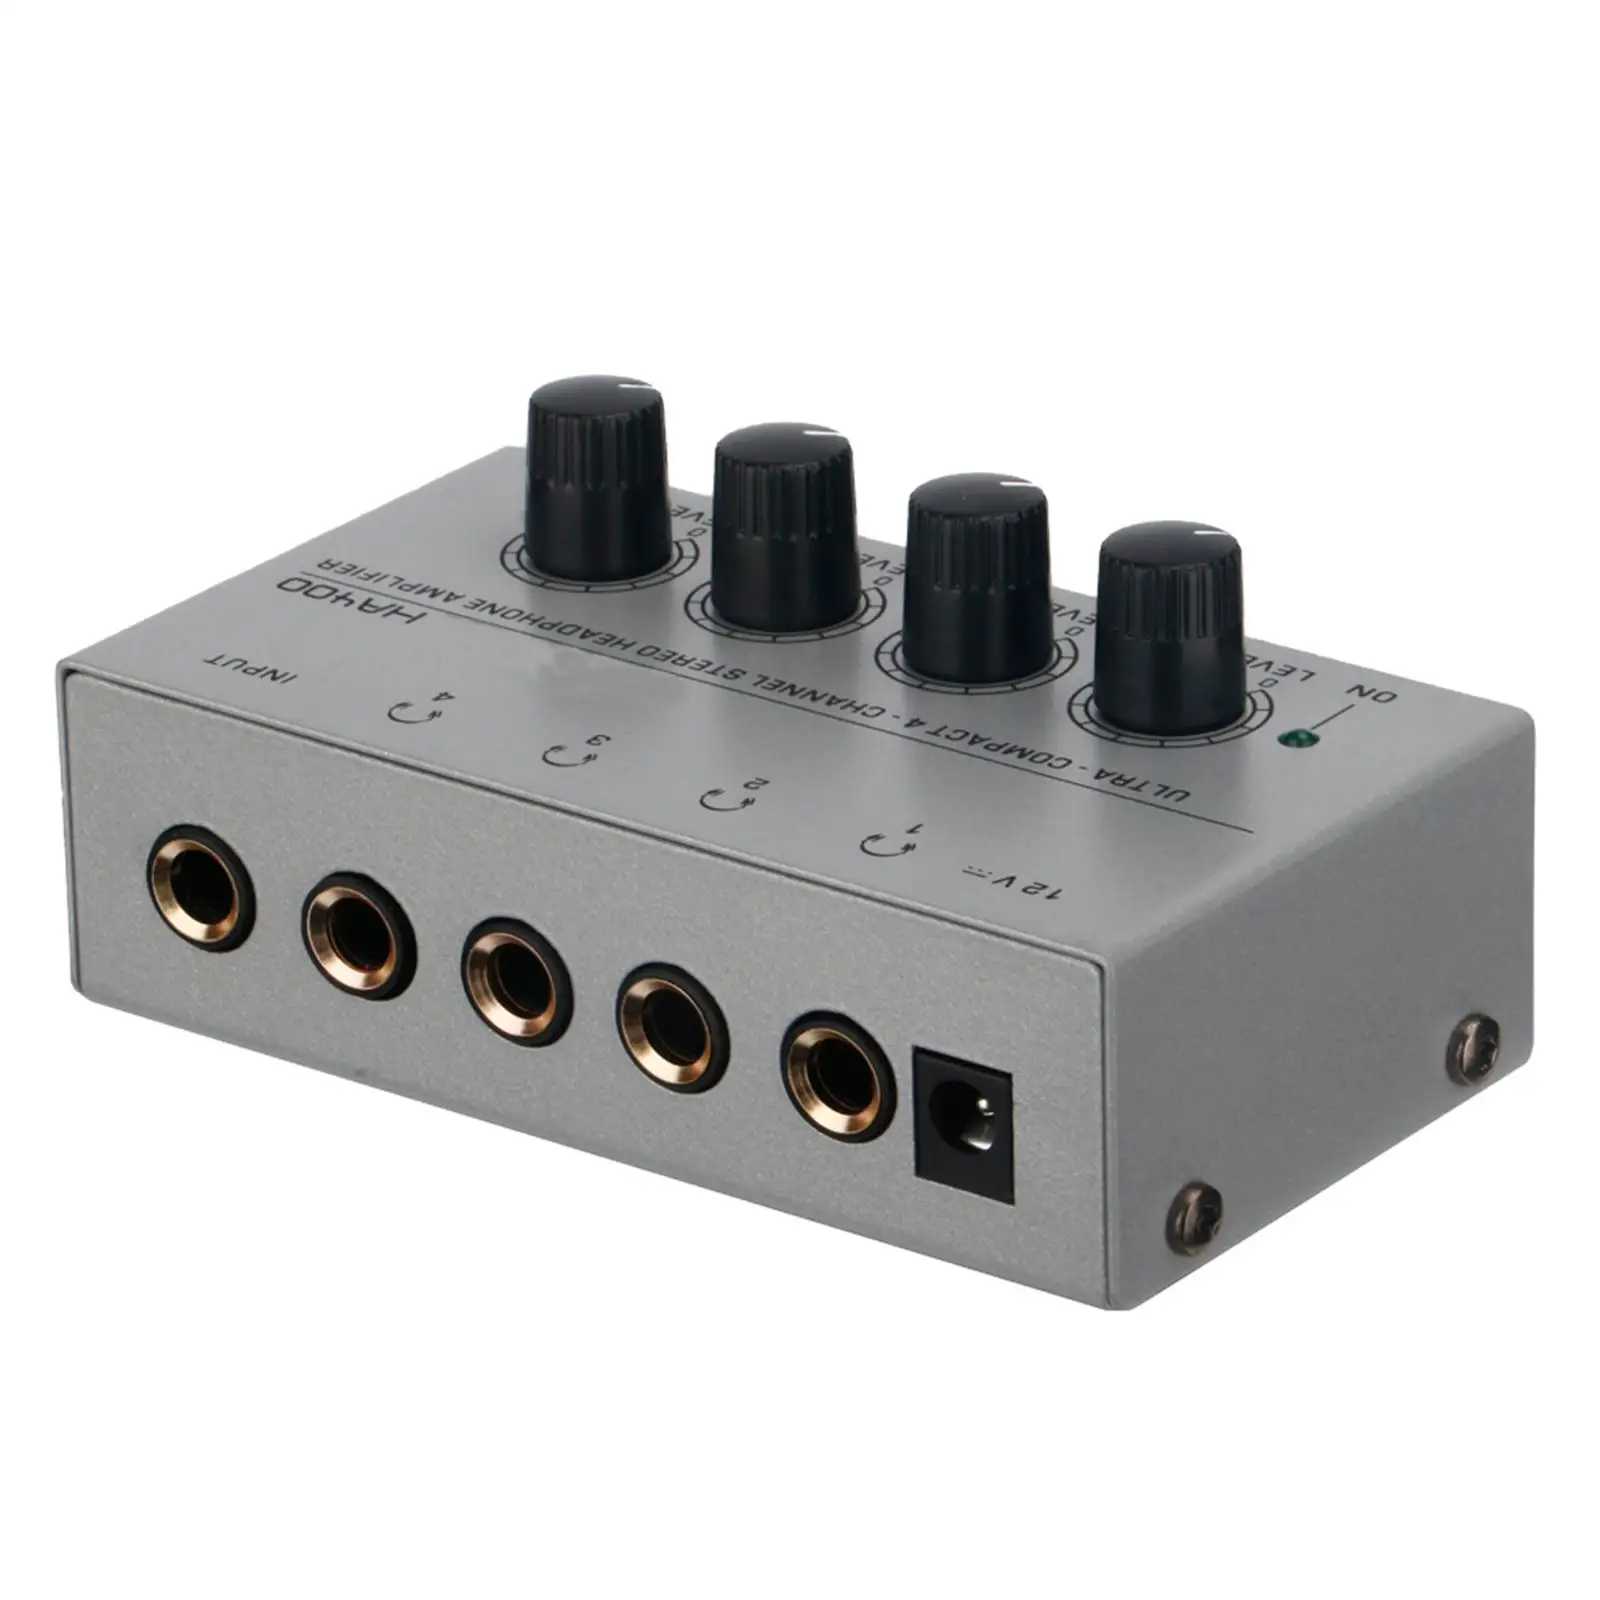 4 Channel Headphone Amp Sound Mixer Clear Sound Desktop Amp Stereo Compact for sound Reinforcement Home Recording Studio